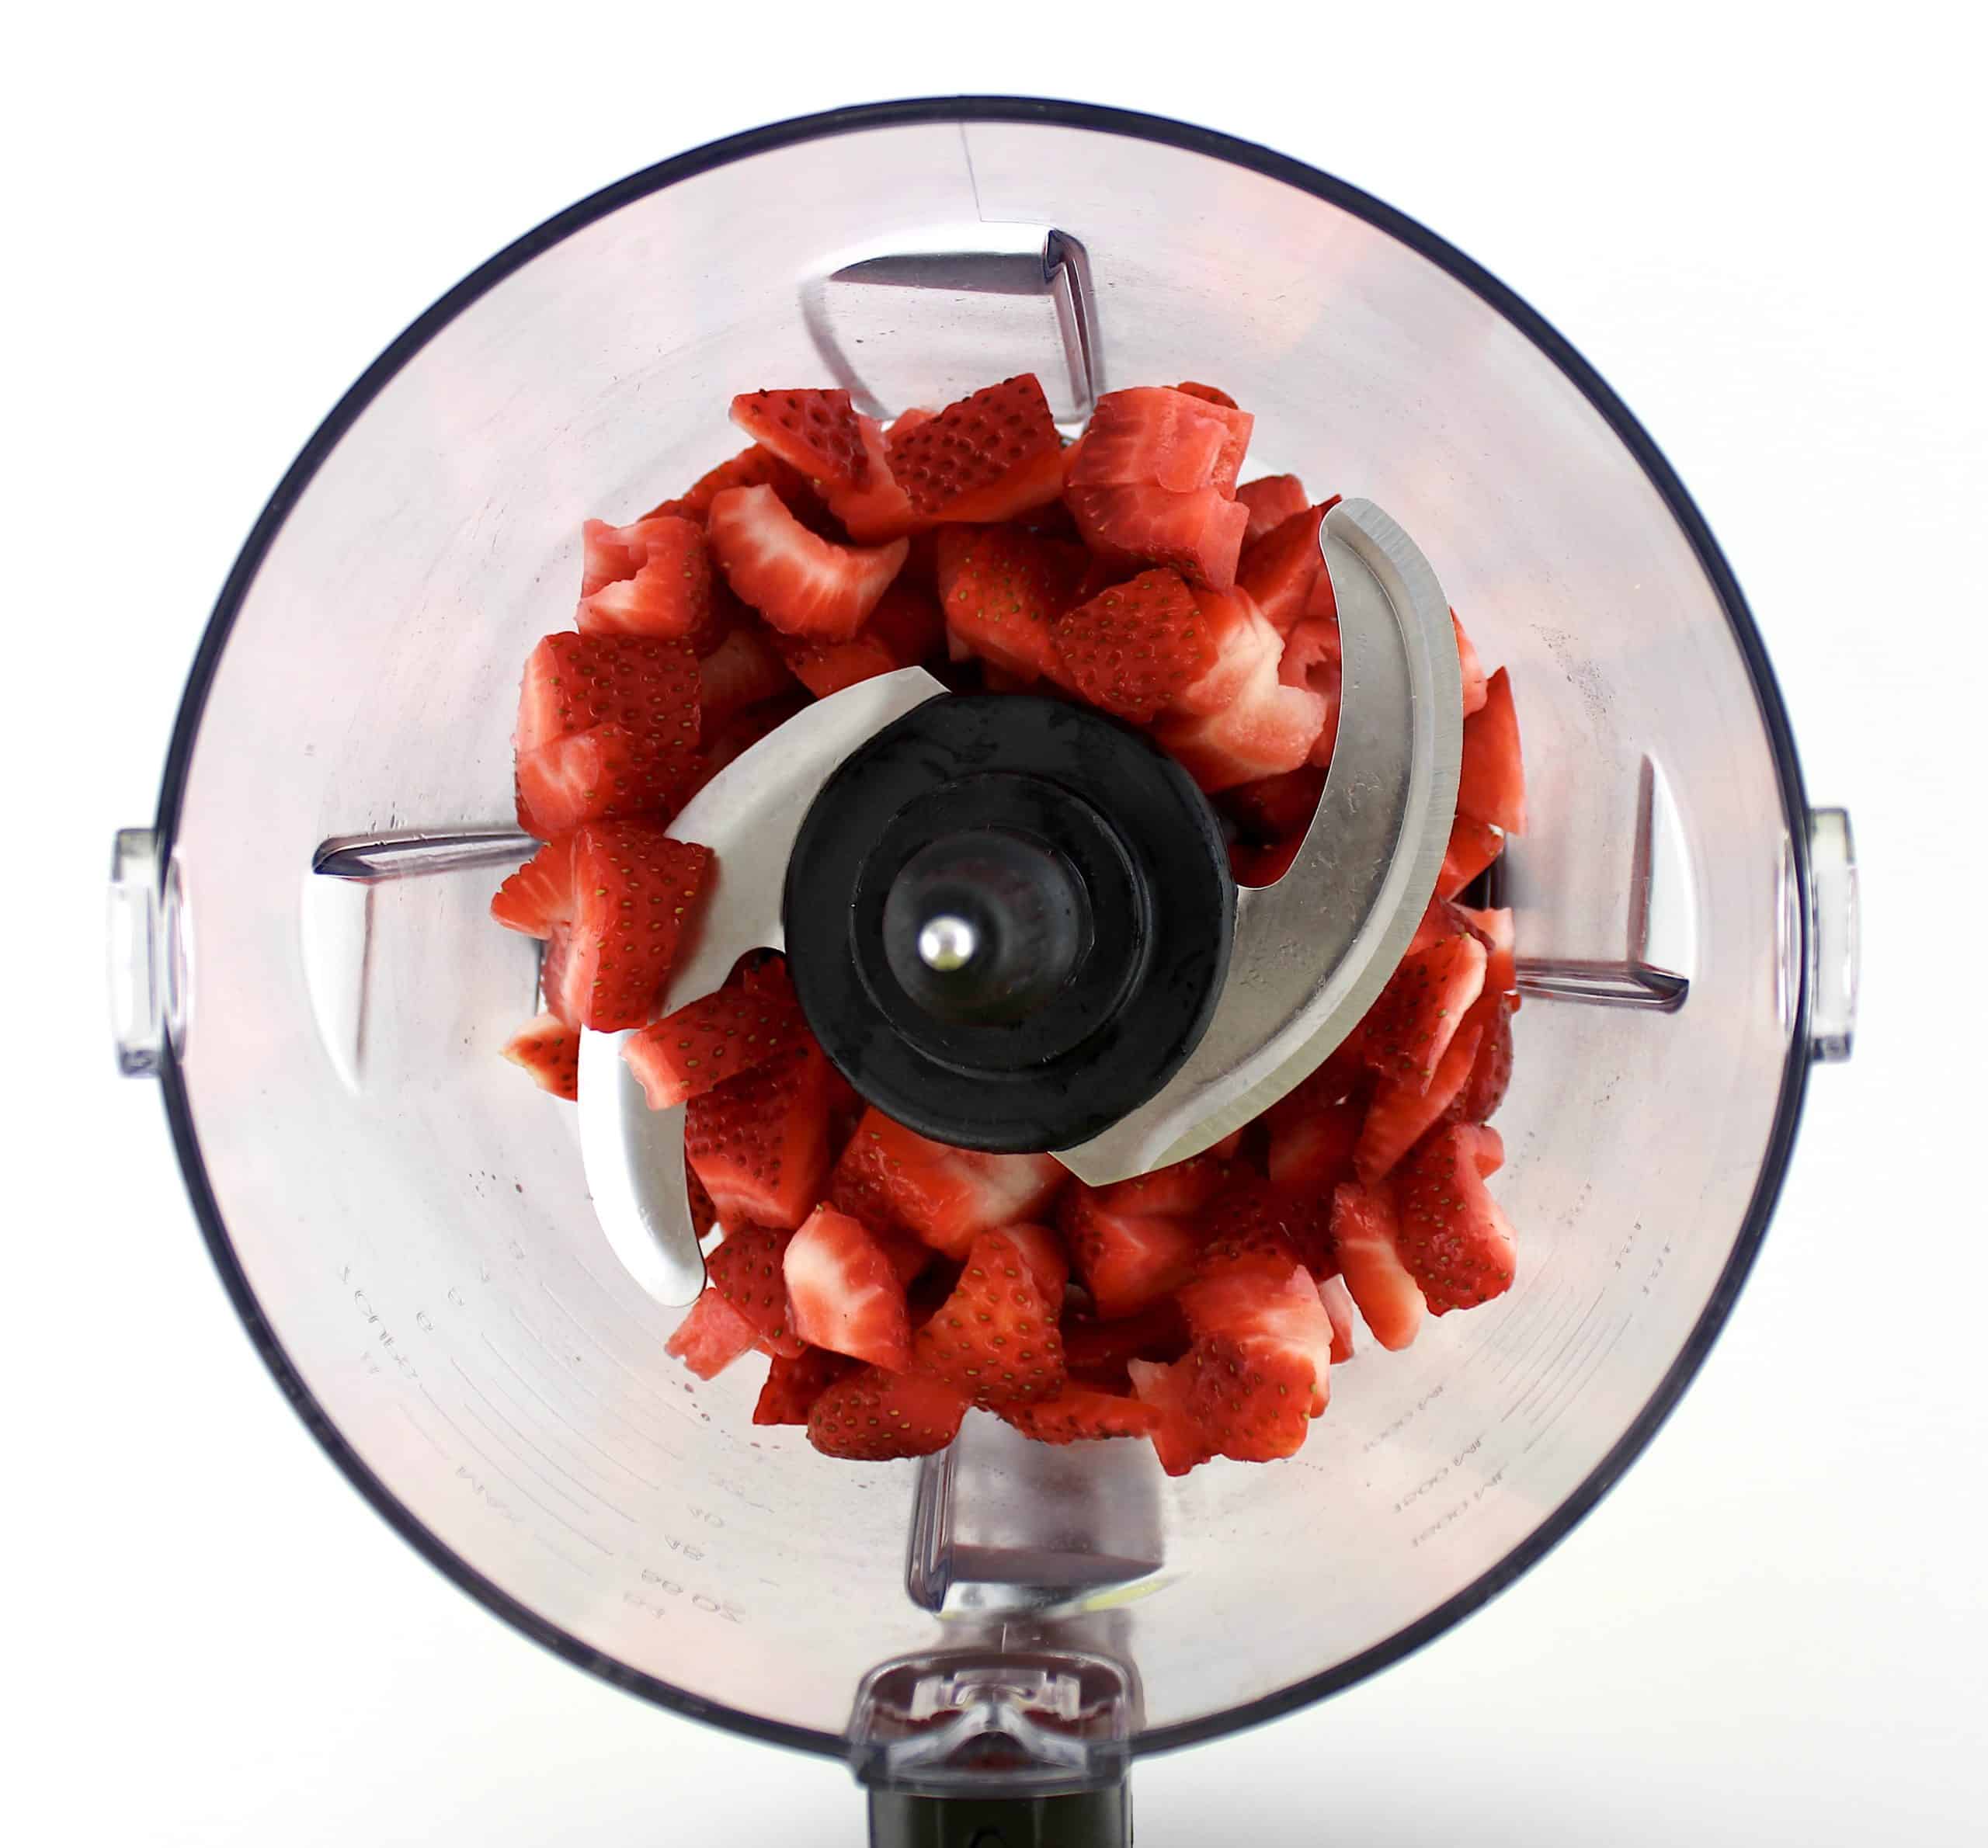 chopped strawberries in food processor